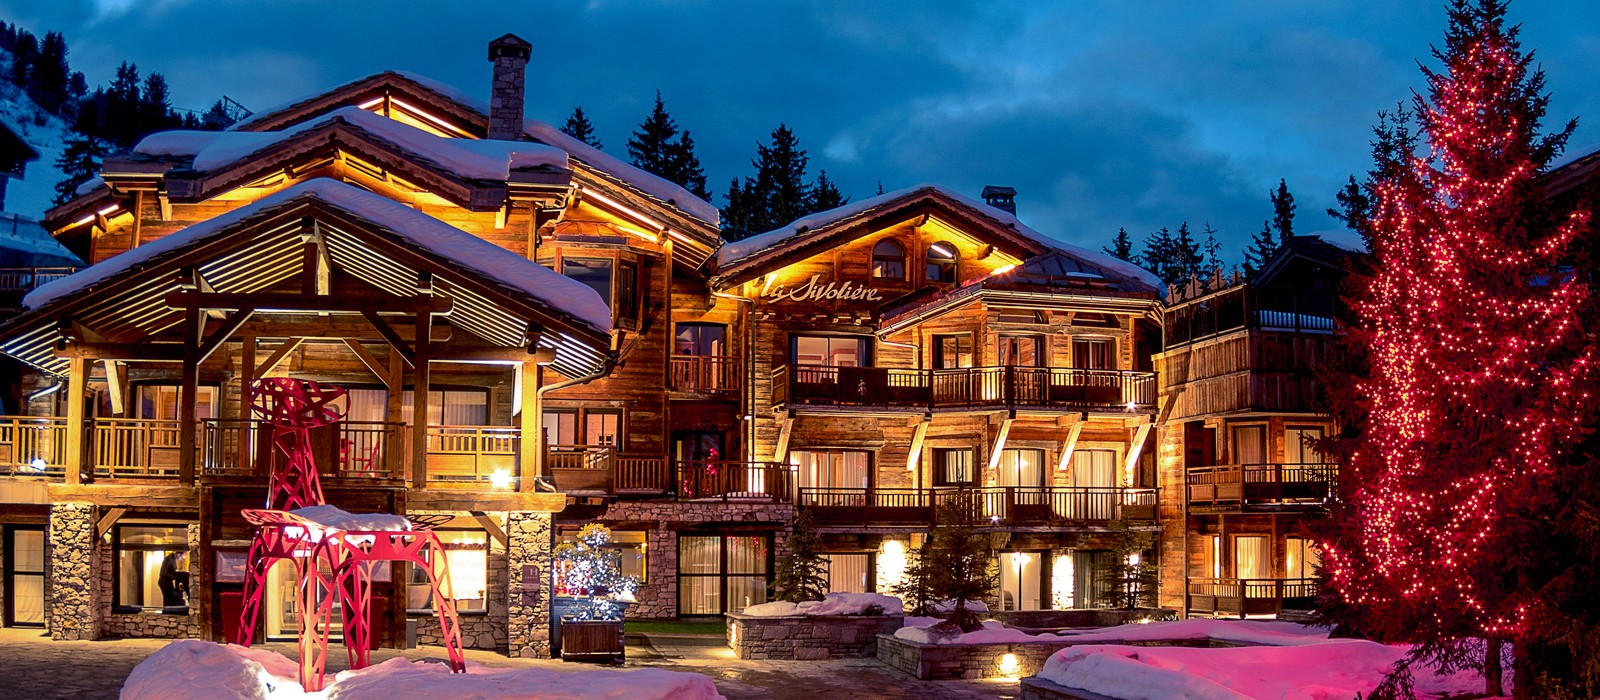 header - Hotel La Sivoliere - Luxury Ski holiday packages